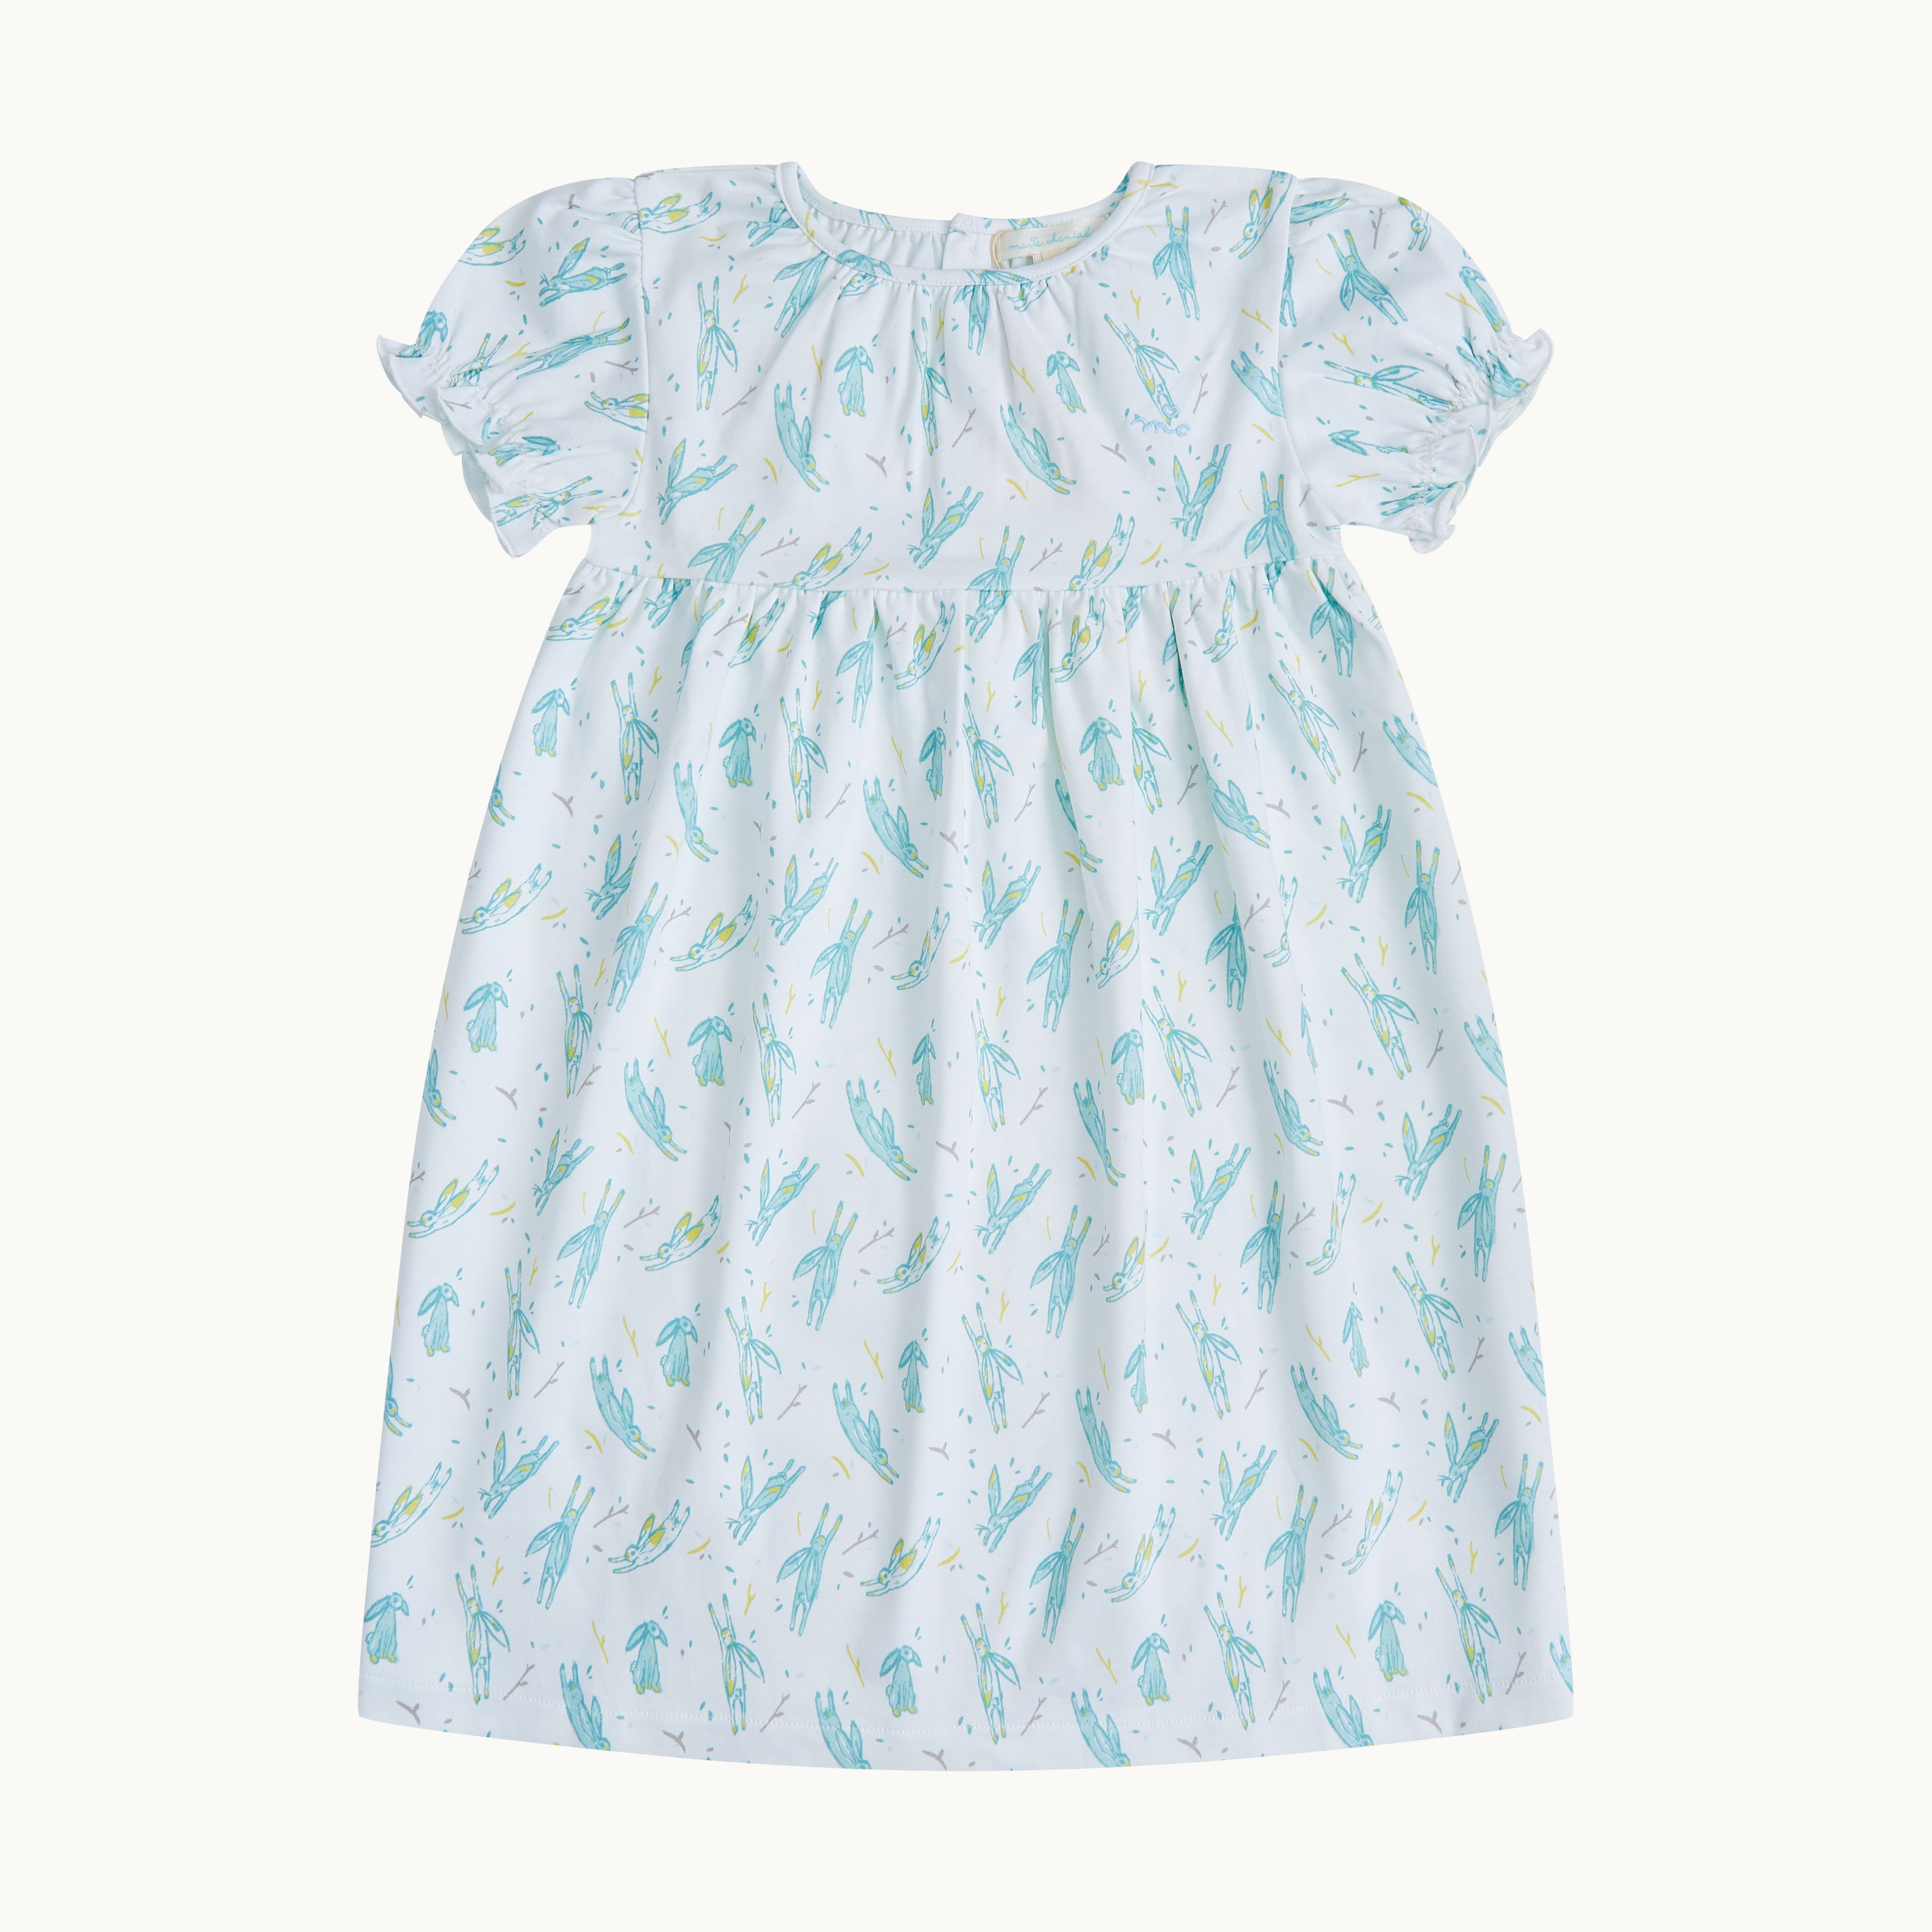 Little Bunny Nightgown Child - White/Blue